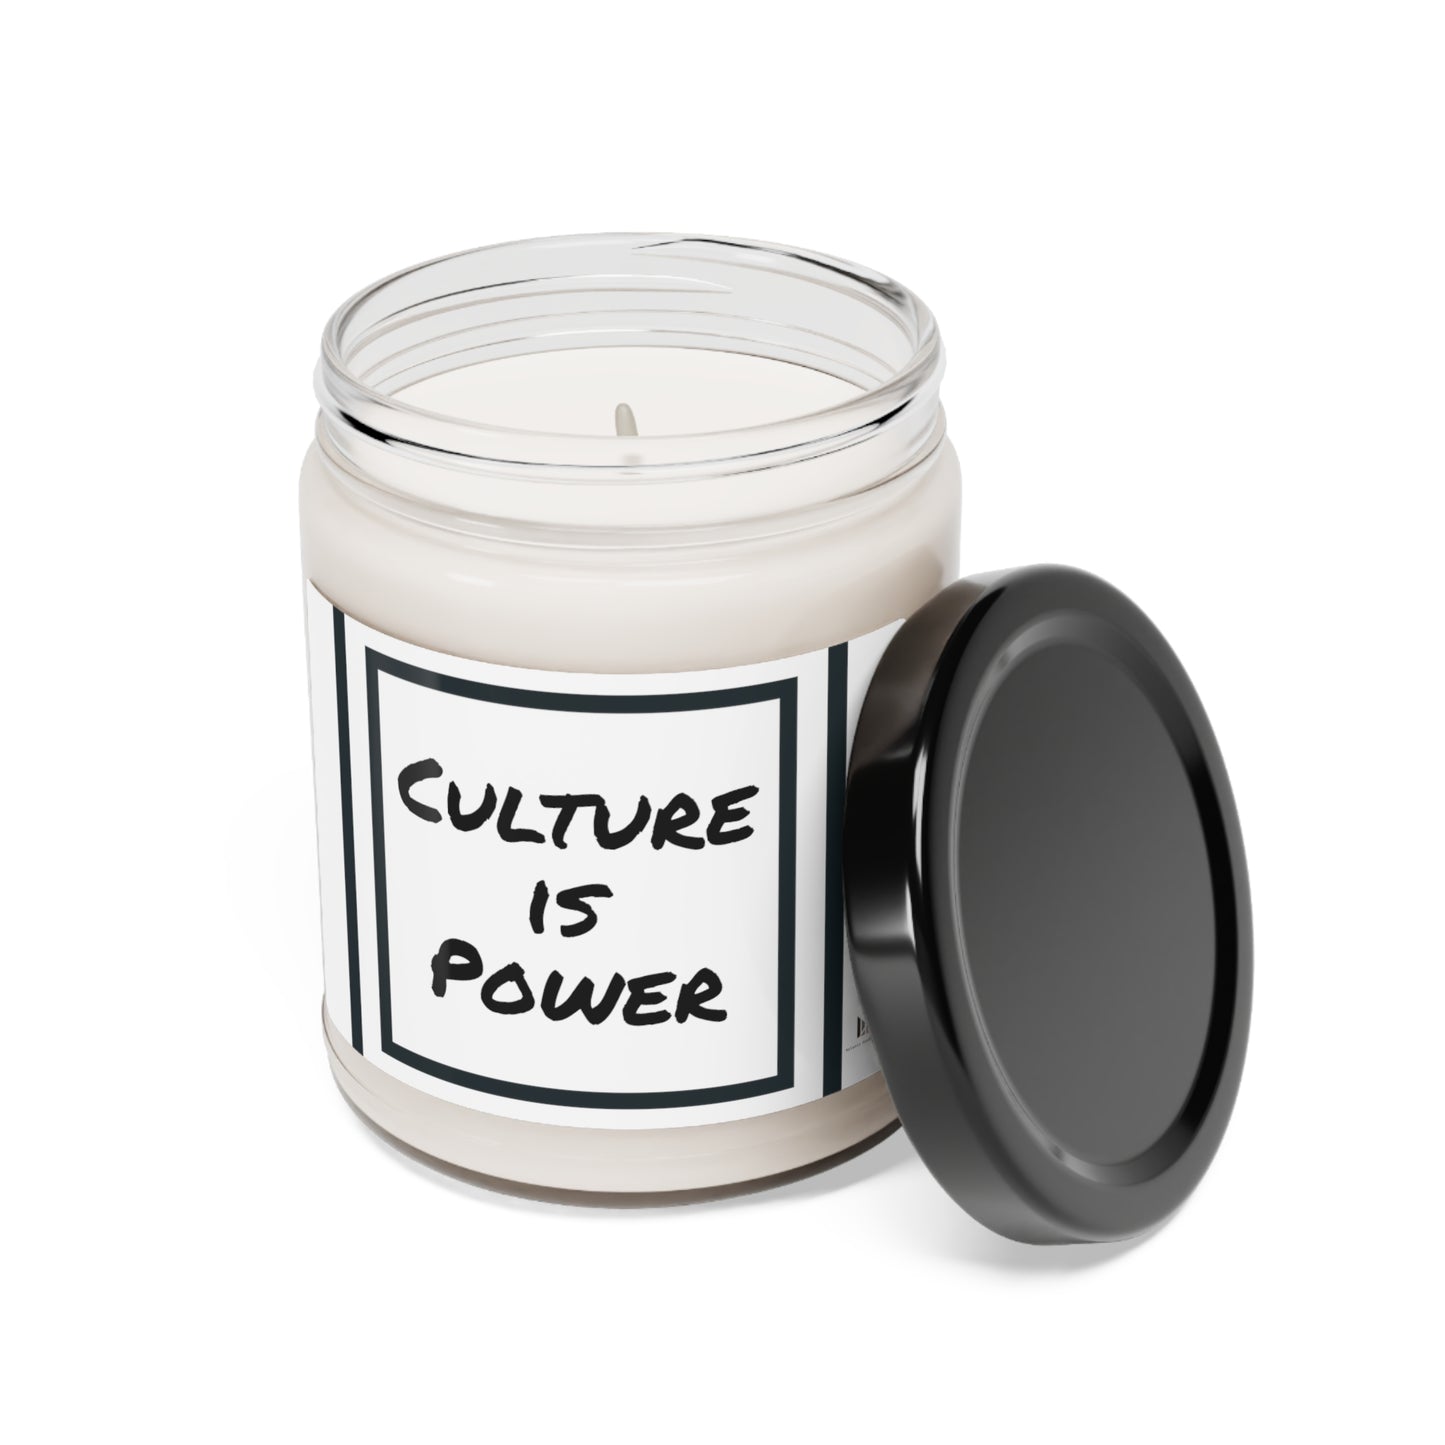 "Culture" Scented Soy Candle, 9oz